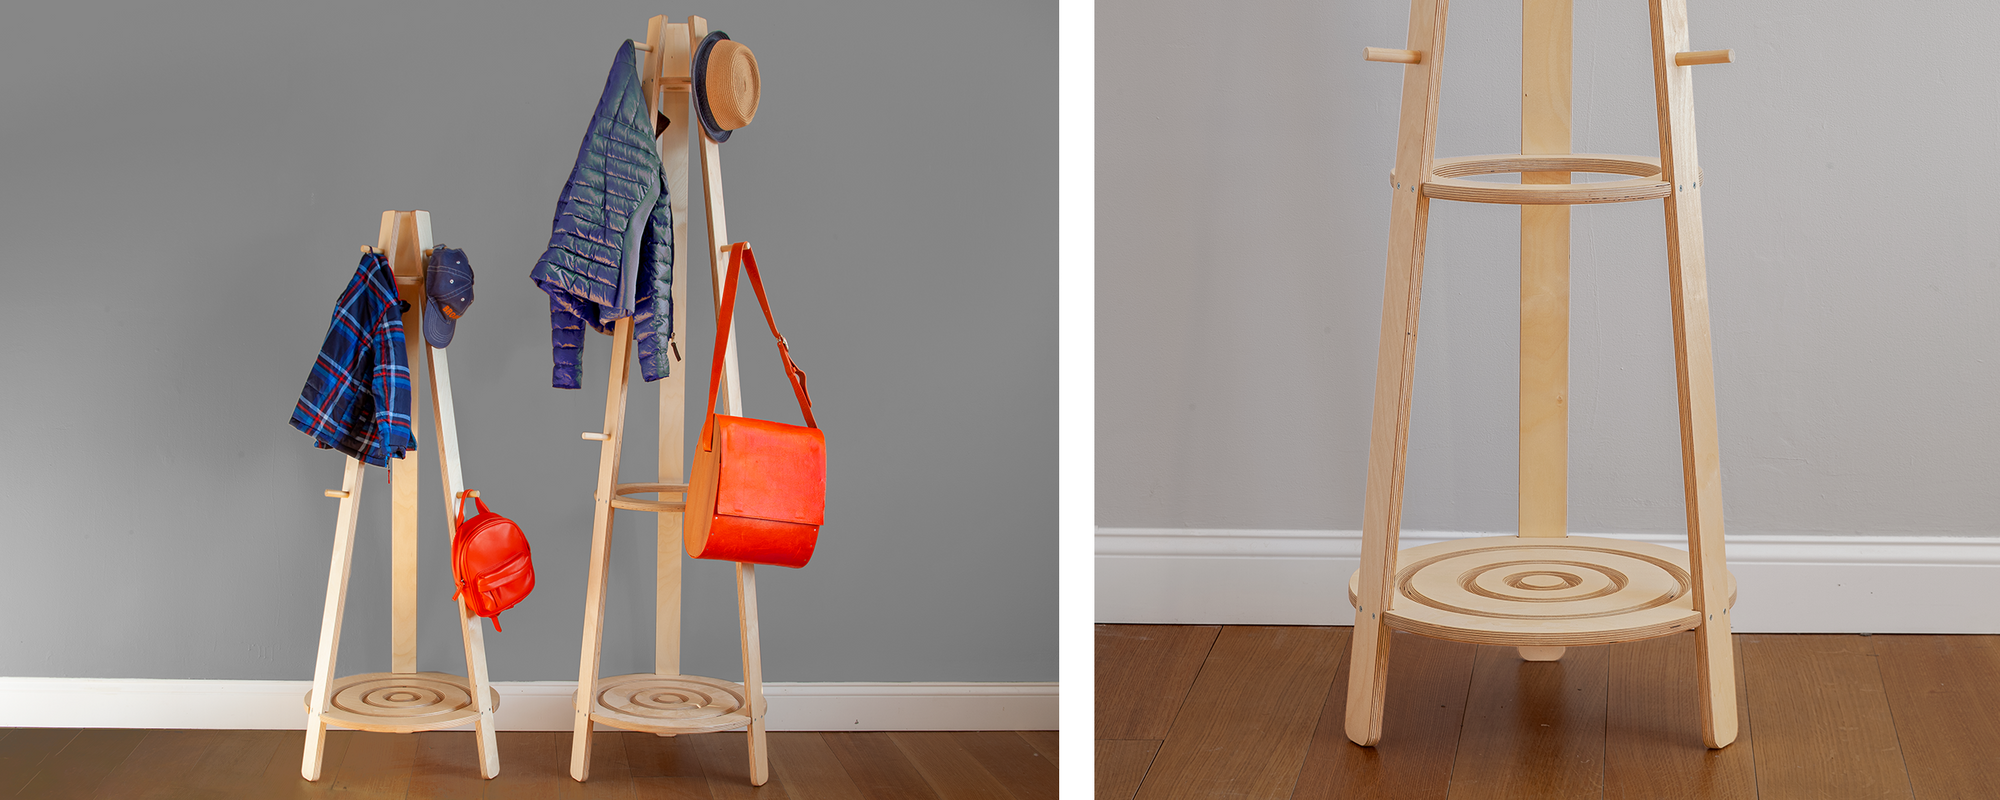 Two images of a wooden easel-style coat rack; one with children's bags and clothes, and one empty.